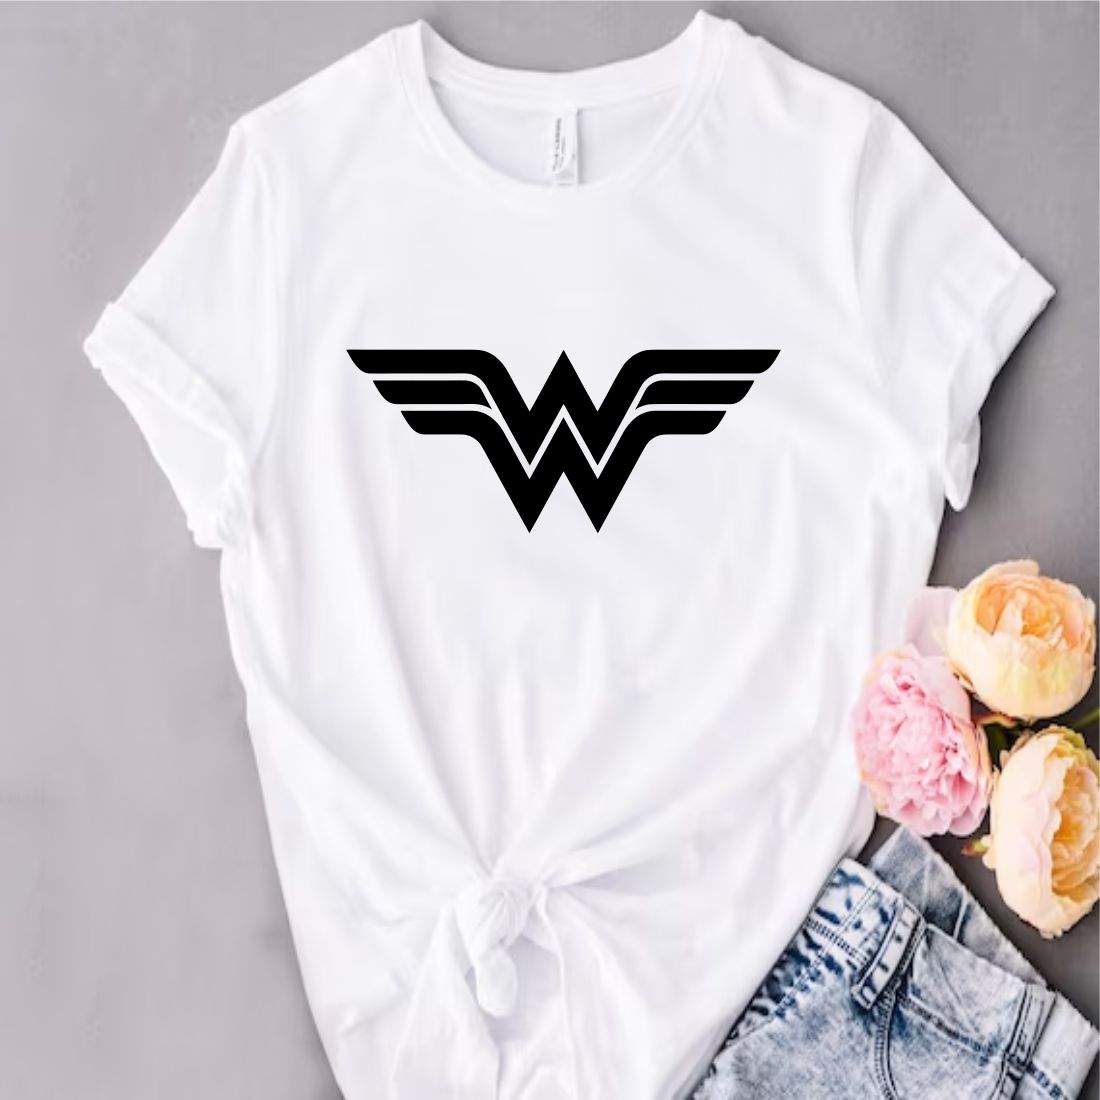 Wonder Woman Svg, Wonder Woman, Woman Svg, Wonder Woman Png, Wonder Woman Monogram Png, Marvel Svg, DC Svg, Instant Download Vector Cut file Cricut, Silhouette, Pdf Png, Dxf, Decal preview image.